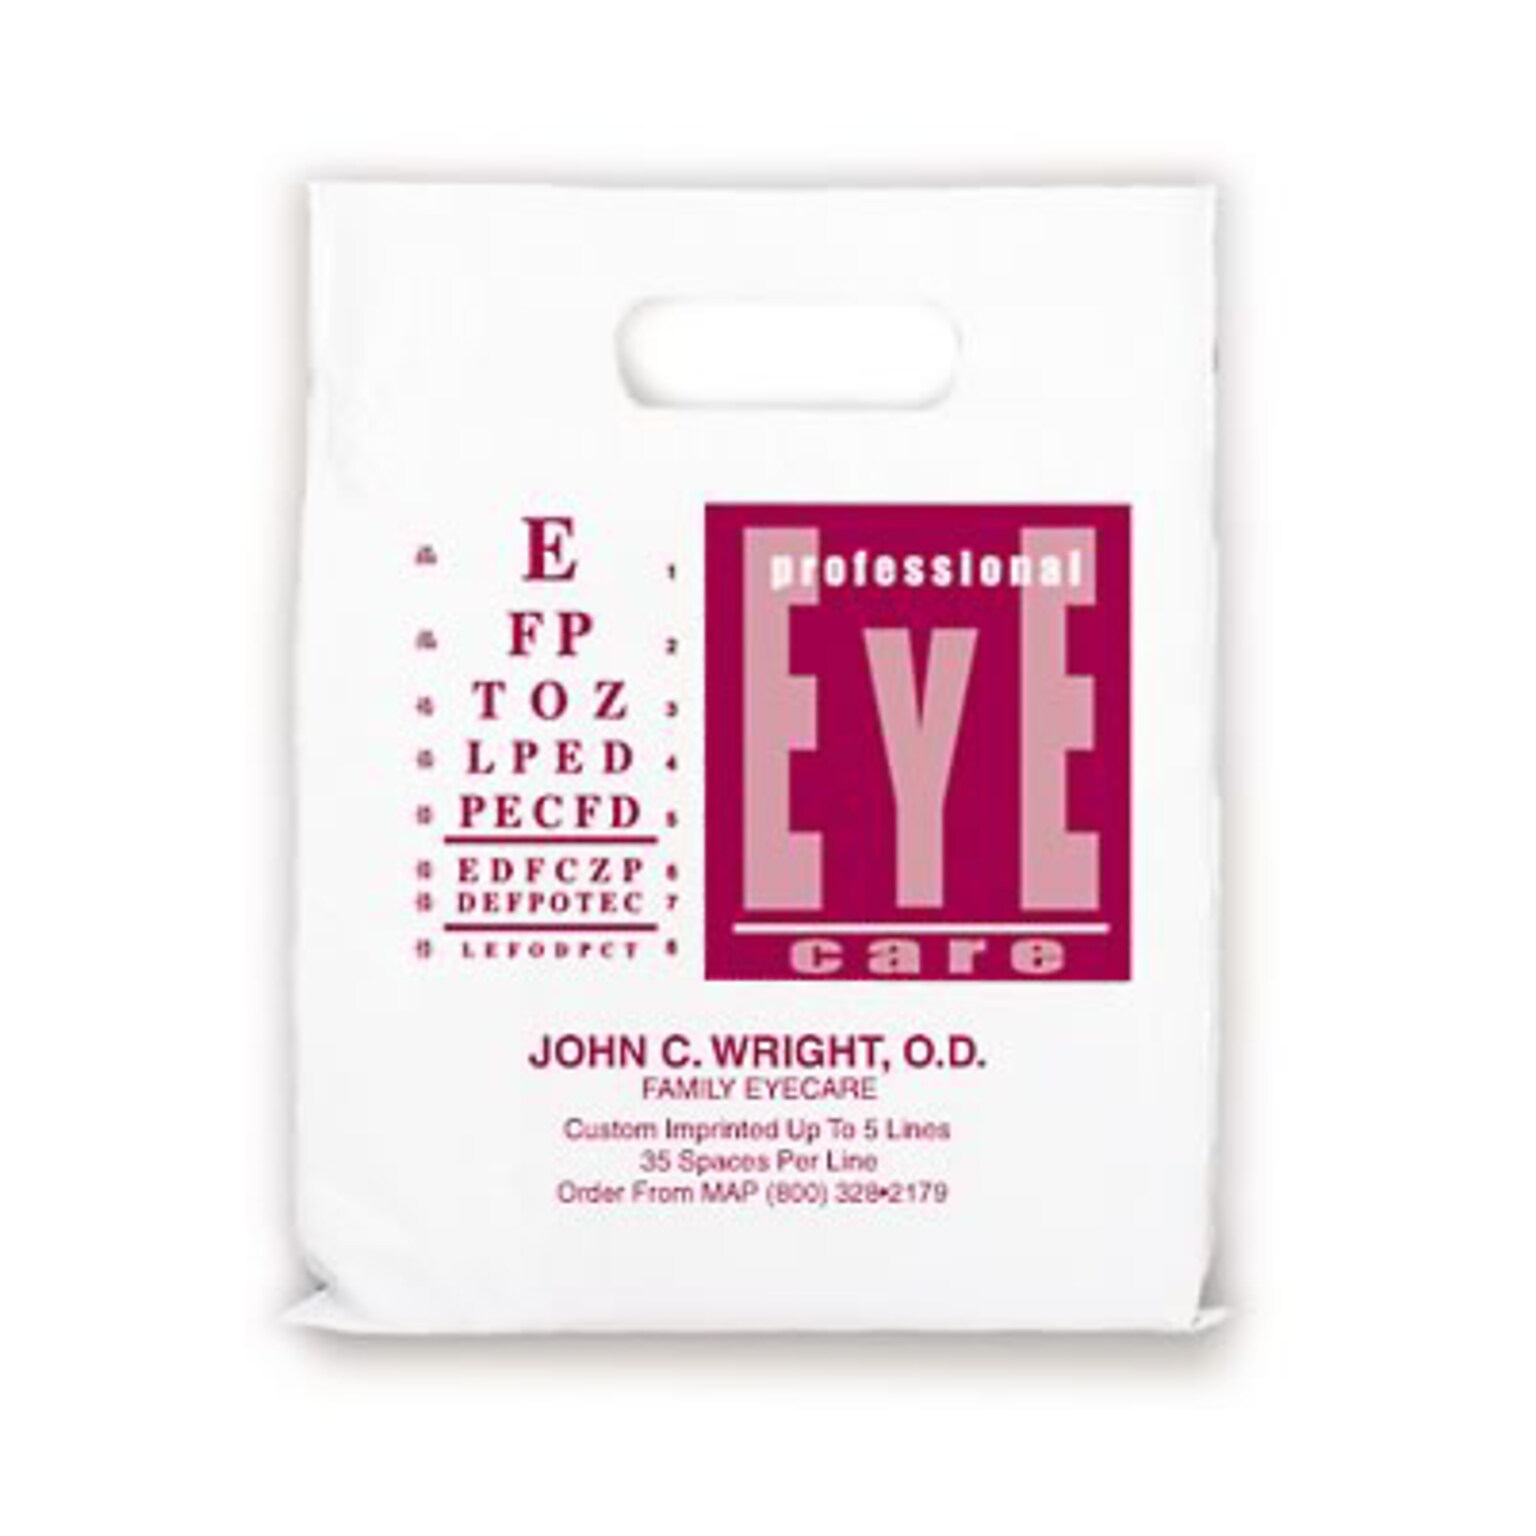 Medical Arts Press® Eye Care Personalized 1-Color Supply Bags; 7-1/2x9, Professional EC Chart, 100 Bags, (725691)